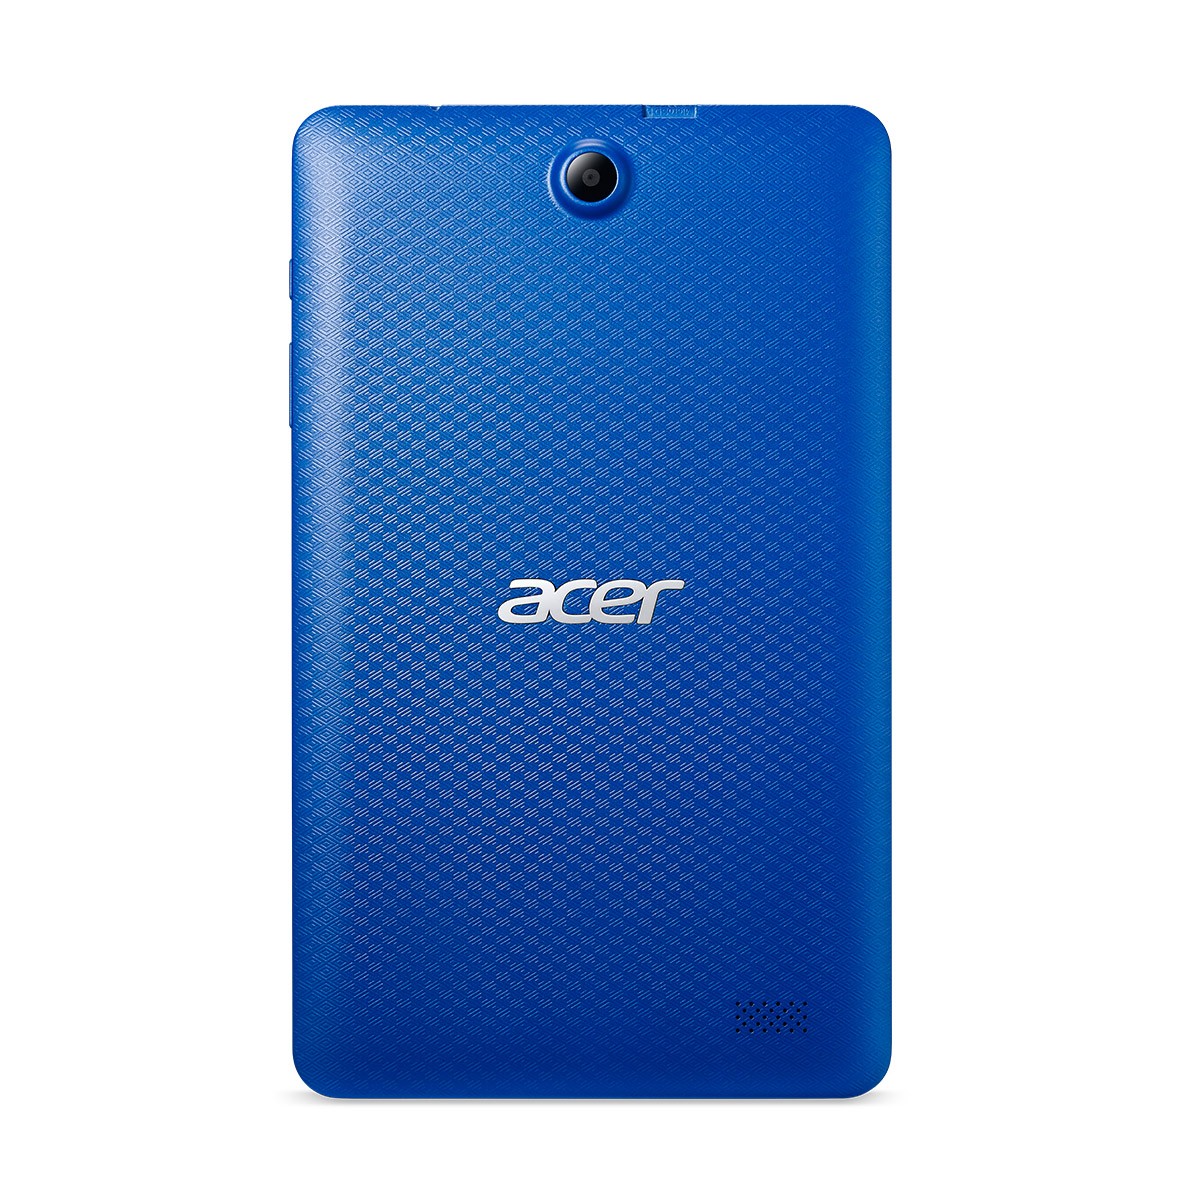 CES 2016: Acer Unveils Iconia One 8 Android Tablet for ...